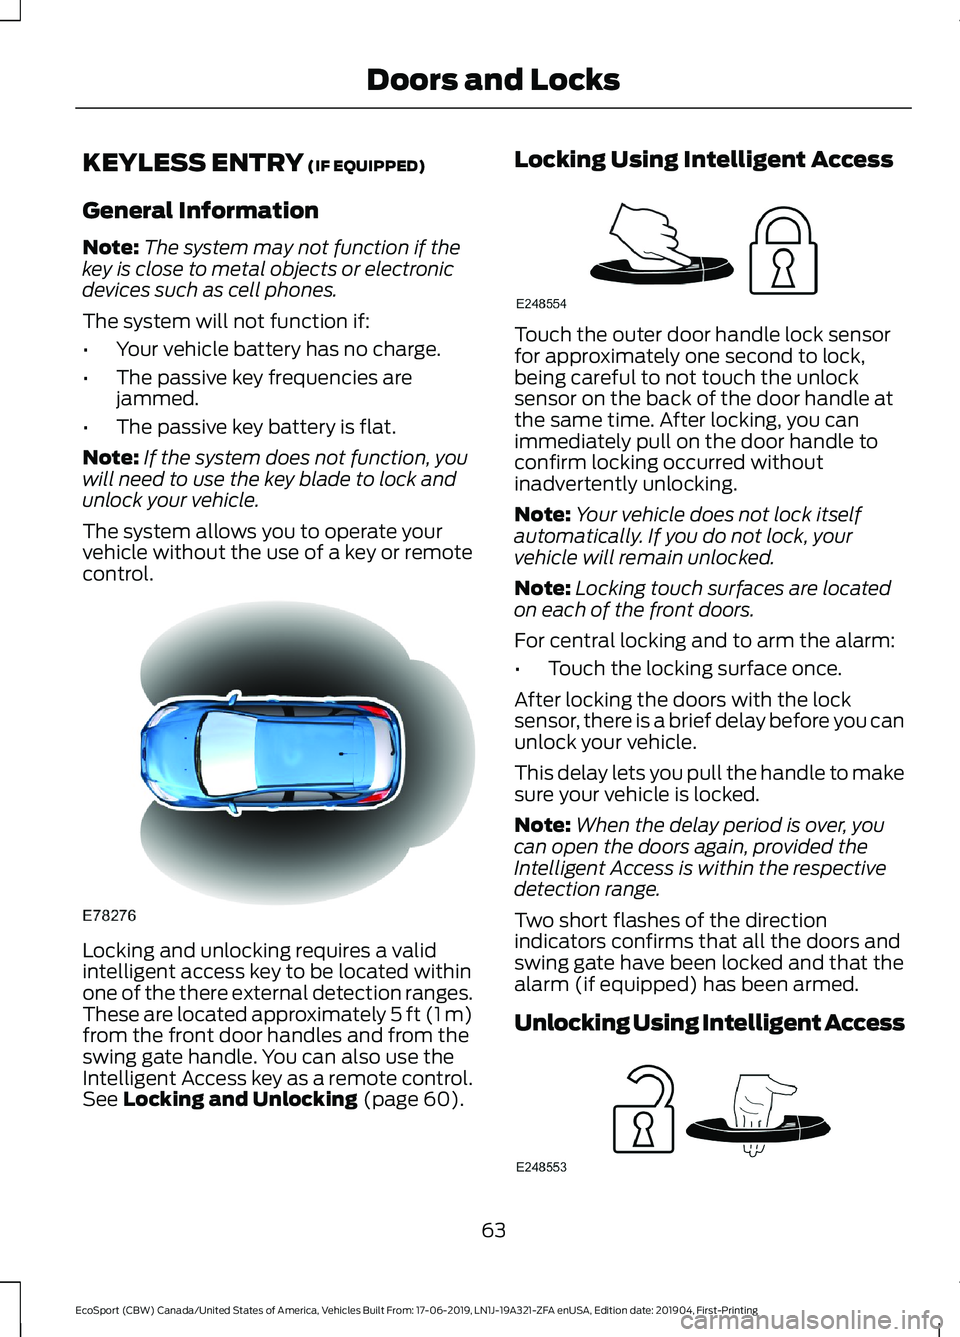 FORD ECOSPORT 2020  Owners Manual KEYLESS ENTRY (IF EQUIPPED)
General Information
Note:The system may not function if thekey is close to metal objects or electronicdevices such as cell phones.
The system will not function if:
•Your 